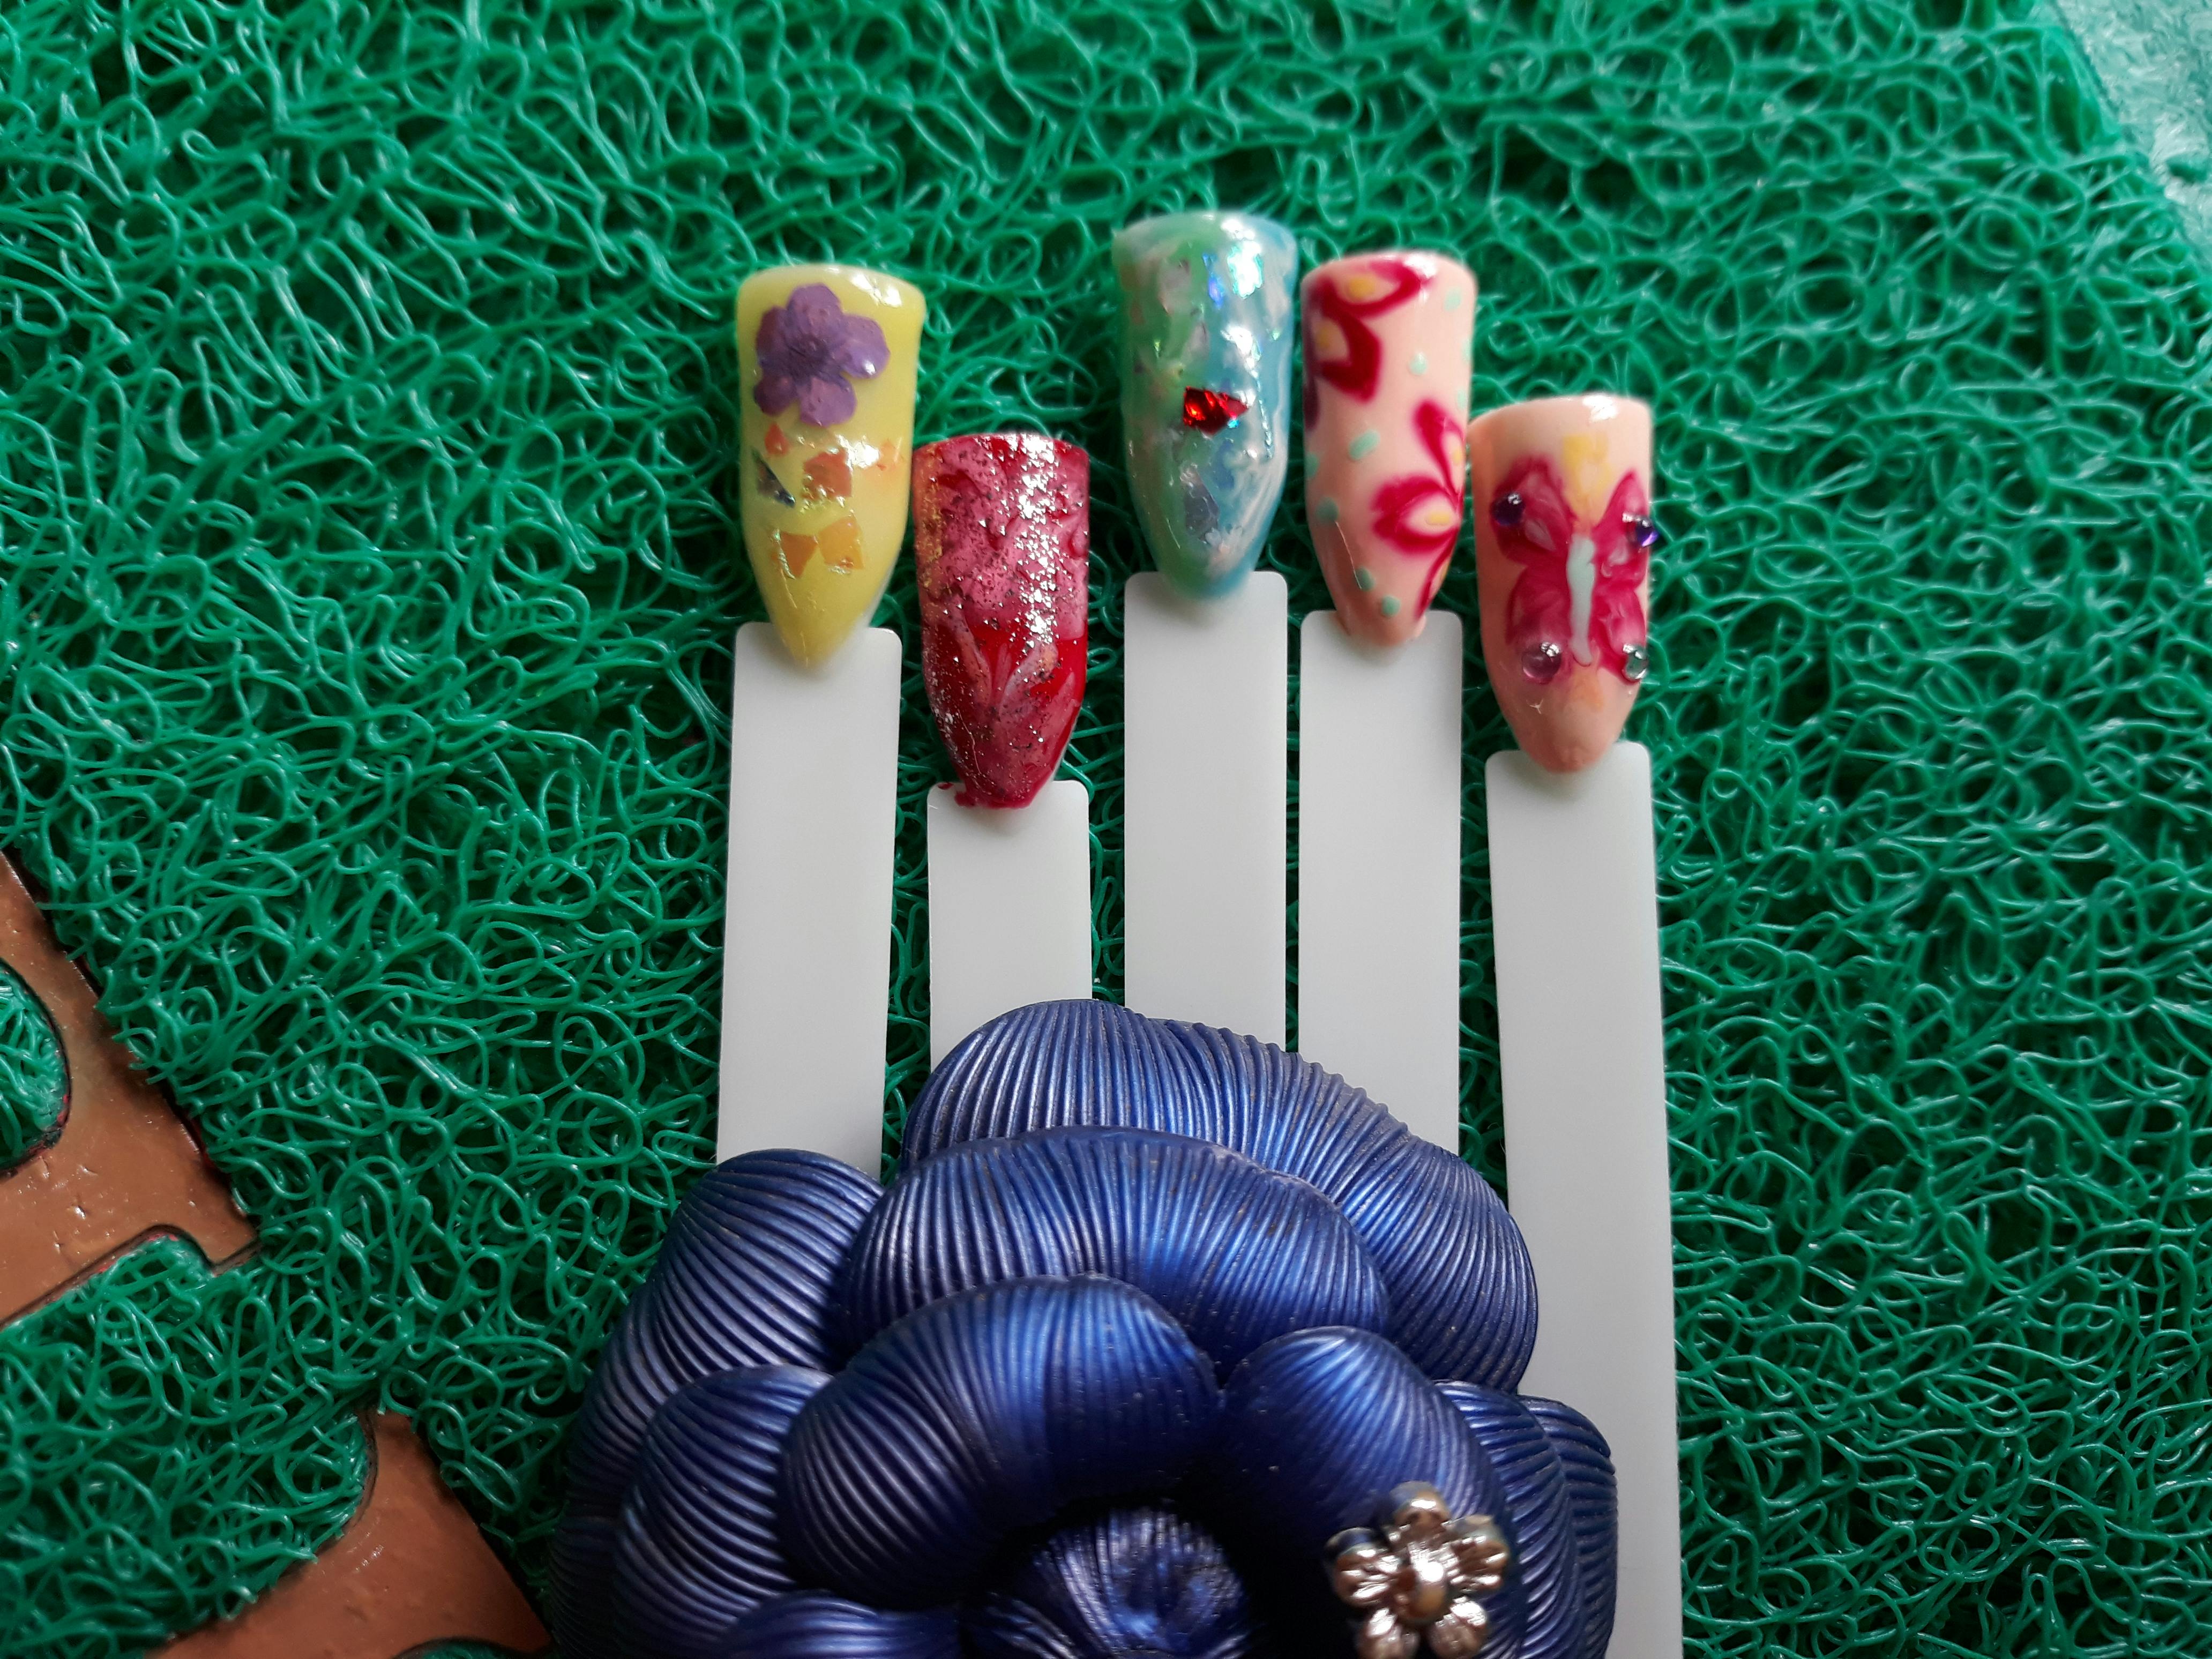 Real Nail Art Images - wide 1